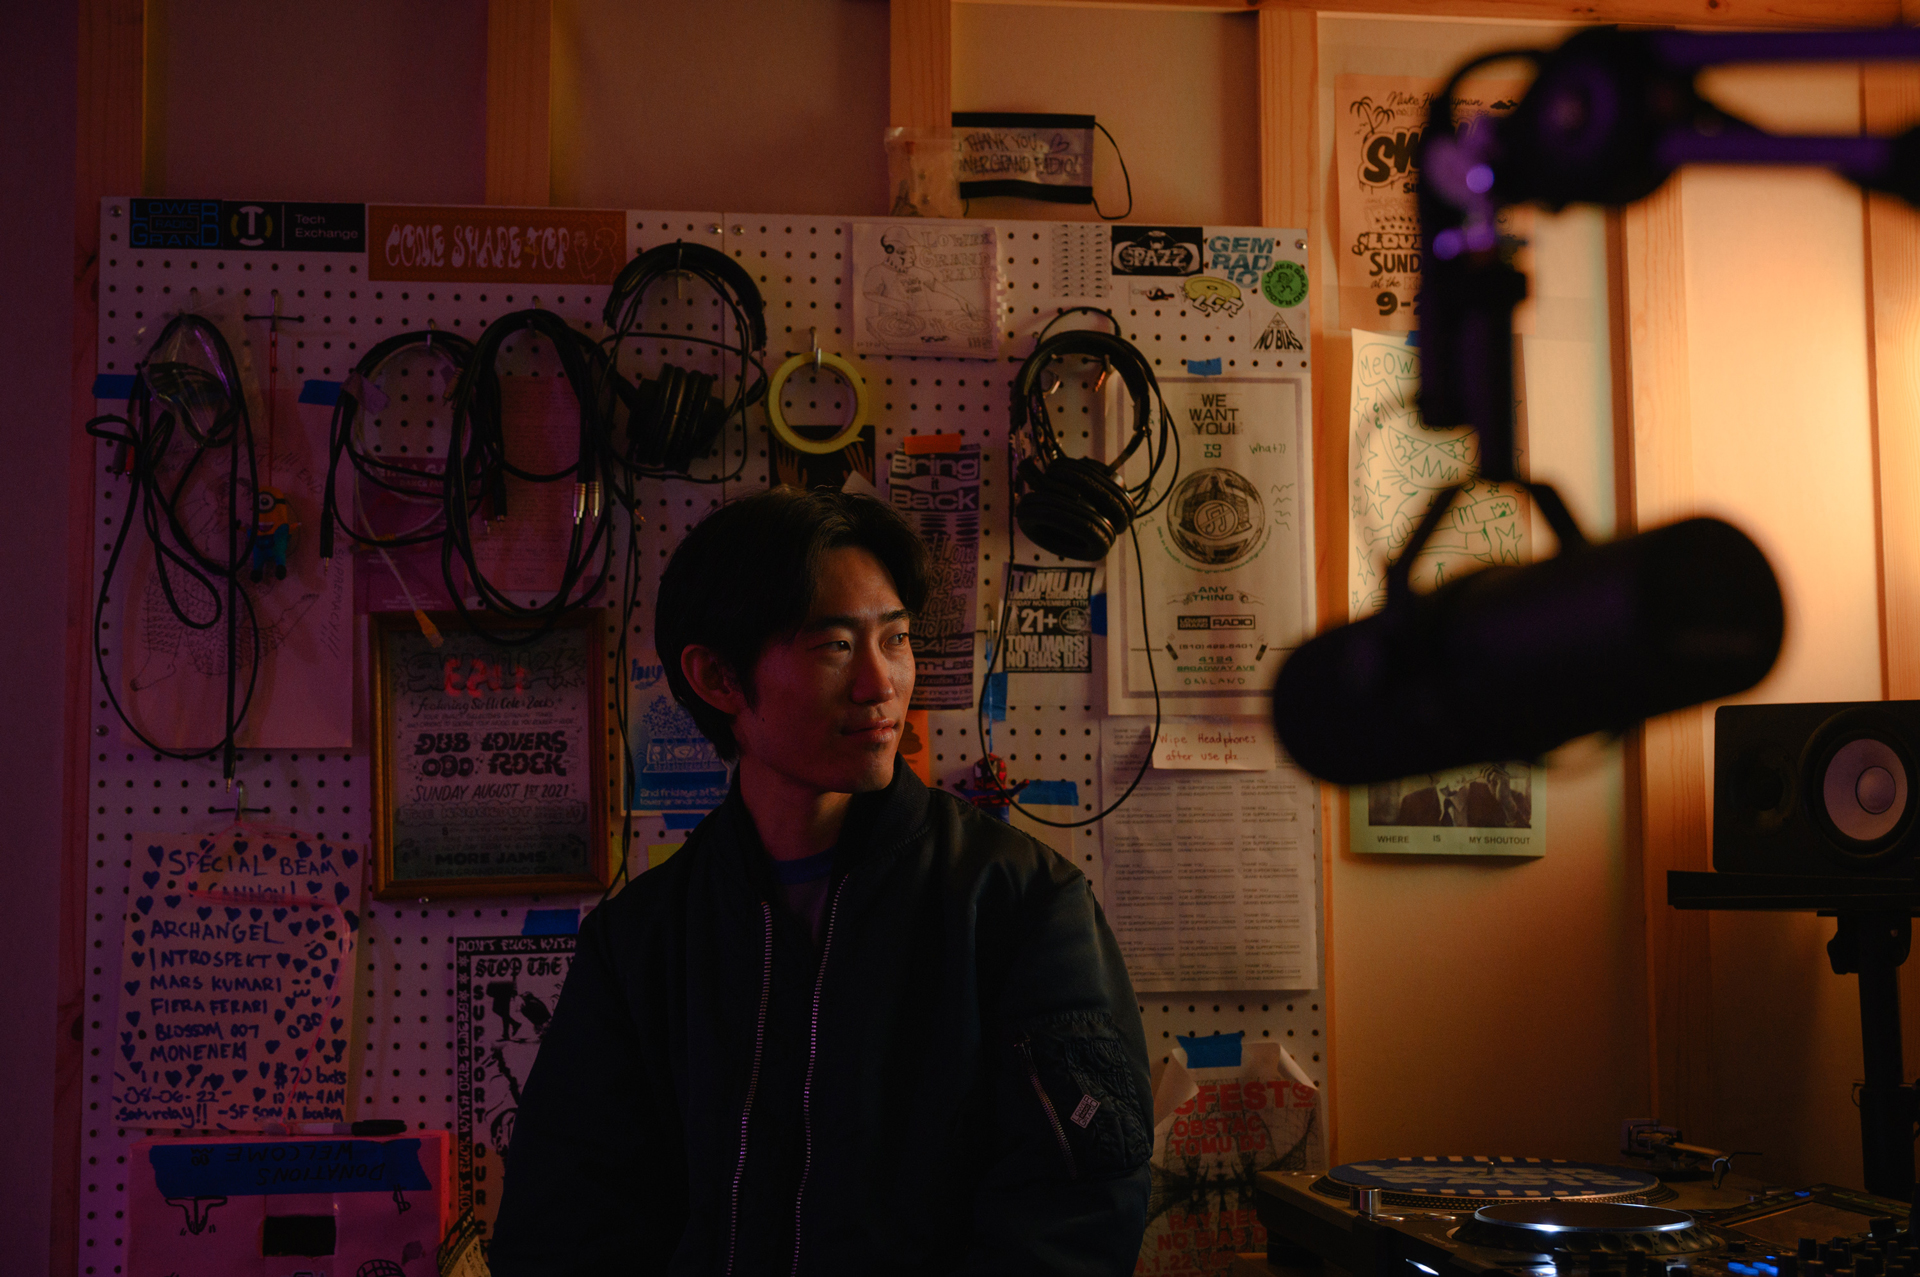 Asian man in hoodie sits in front of pegboard covered with cables and headphones, mic in foreground